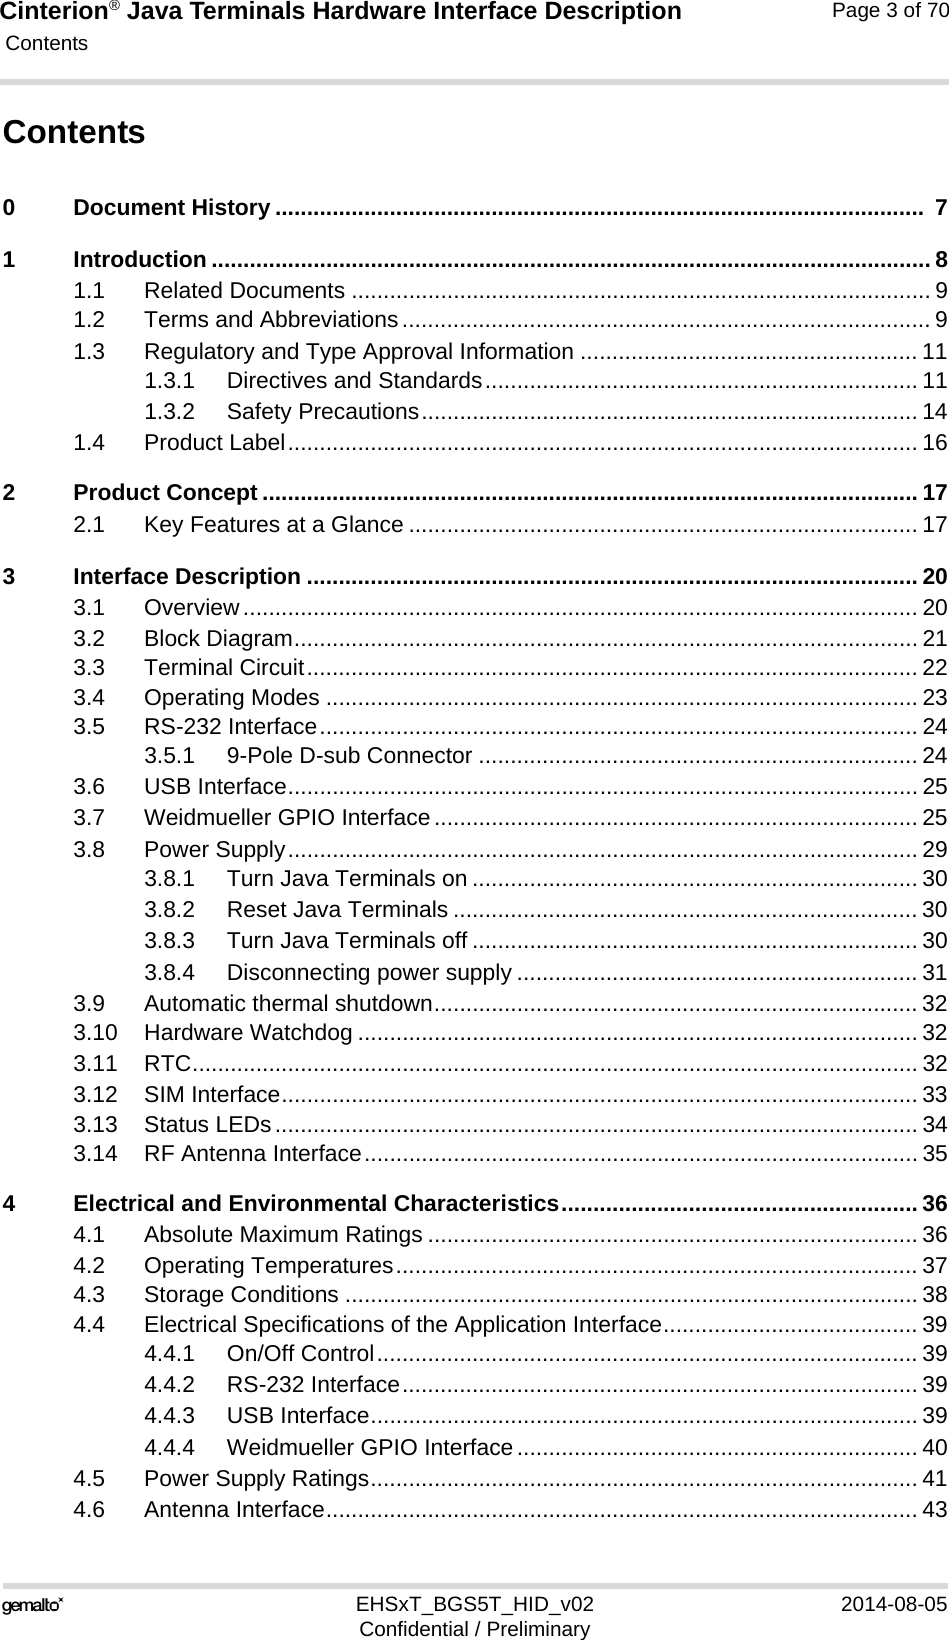 Cinterion® Java Terminals Hardware Interface Description Contents115EHSxT_BGS5T_HID_v02 2014-08-05Confidential / PreliminaryPage 3 of 70Contents0 Document History ......................................................................................................  71 Introduction ................................................................................................................. 81.1 Related Documents ........................................................................................... 91.2 Terms and Abbreviations................................................................................... 91.3 Regulatory and Type Approval Information ..................................................... 111.3.1 Directives and Standards.................................................................... 111.3.2 Safety Precautions.............................................................................. 141.4 Product Label................................................................................................... 162 Product Concept ....................................................................................................... 172.1 Key Features at a Glance ................................................................................ 173 Interface Description ................................................................................................ 203.1 Overview.......................................................................................................... 203.2 Block Diagram.................................................................................................. 213.3 Terminal Circuit................................................................................................ 223.4 Operating Modes ............................................................................................. 233.5 RS-232 Interface.............................................................................................. 243.5.1 9-Pole D-sub Connector ..................................................................... 243.6 USB Interface................................................................................................... 253.7 Weidmueller GPIO Interface............................................................................ 253.8 Power Supply................................................................................................... 293.8.1 Turn Java Terminals on ...................................................................... 303.8.2 Reset Java Terminals ......................................................................... 303.8.3 Turn Java Terminals off ...................................................................... 303.8.4 Disconnecting power supply ............................................................... 313.9 Automatic thermal shutdown............................................................................ 323.10 Hardware Watchdog ........................................................................................ 323.11 RTC.................................................................................................................. 323.12 SIM Interface.................................................................................................... 333.13 Status LEDs..................................................................................................... 343.14 RF Antenna Interface....................................................................................... 354 Electrical and Environmental Characteristics........................................................ 364.1 Absolute Maximum Ratings ............................................................................. 364.2 Operating Temperatures.................................................................................. 374.3 Storage Conditions .......................................................................................... 384.4 Electrical Specifications of the Application Interface........................................ 394.4.1 On/Off Control..................................................................................... 394.4.2 RS-232 Interface................................................................................. 394.4.3 USB Interface...................................................................................... 394.4.4 Weidmueller GPIO Interface............................................................... 404.5 Power Supply Ratings...................................................................................... 414.6 Antenna Interface............................................................................................. 43